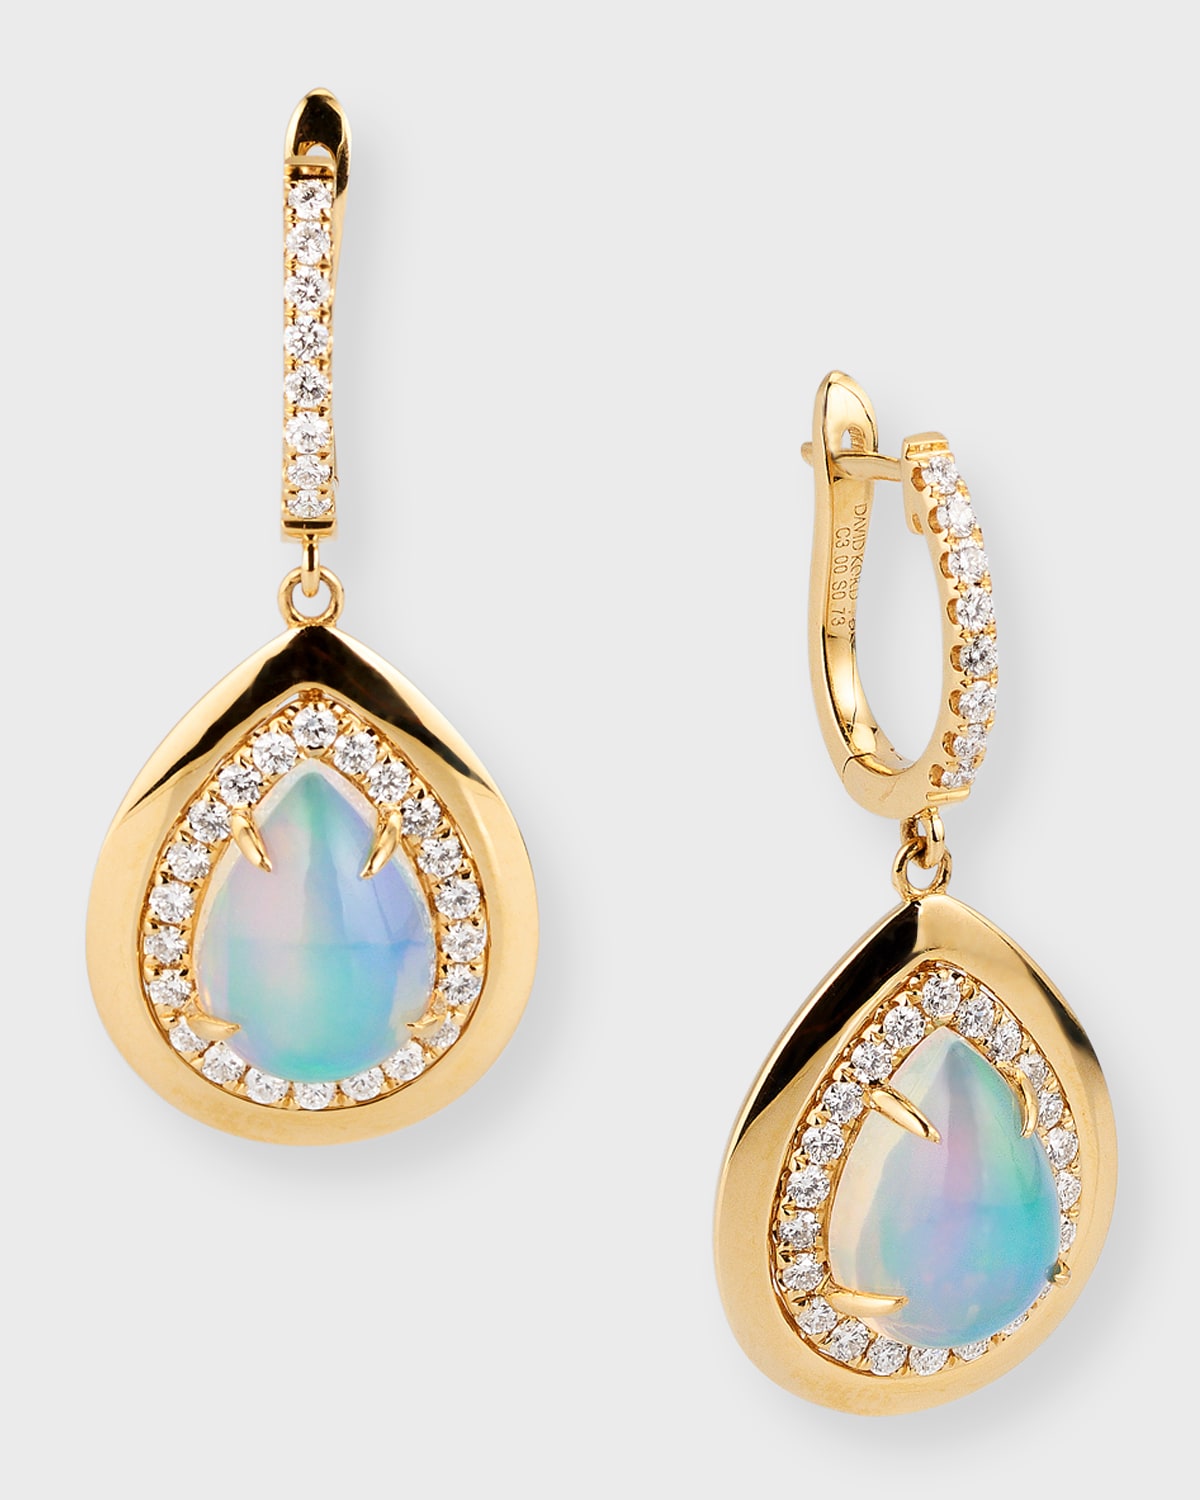 18K Yellow Gold Earrings with Pear-Shape Opal and Diamonds, 2.97tcw